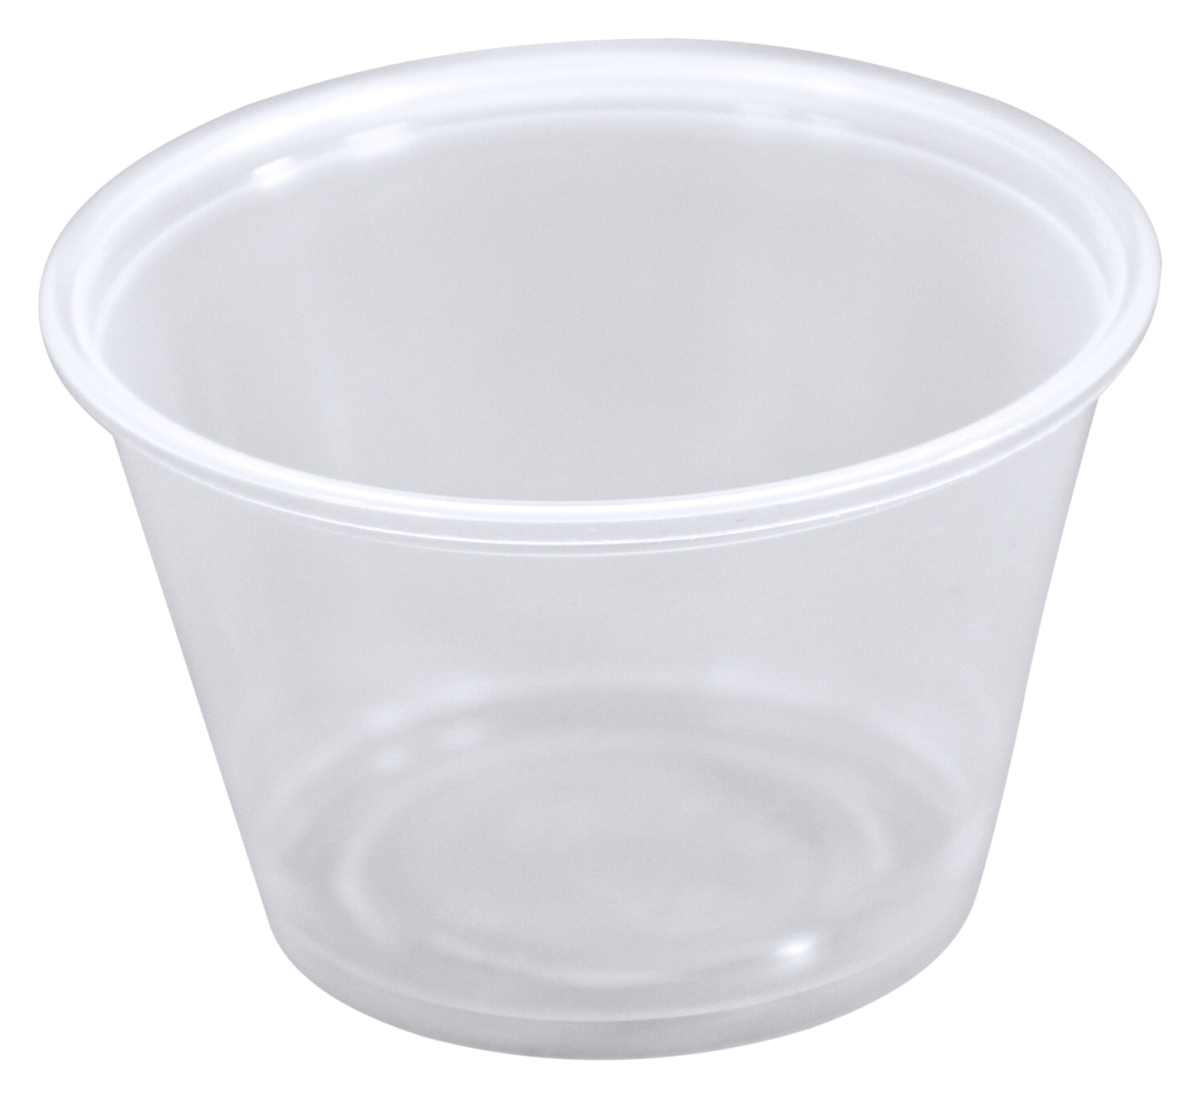 2003381 3.25 Oz Portion Cups, Clear - Pack Of 2500